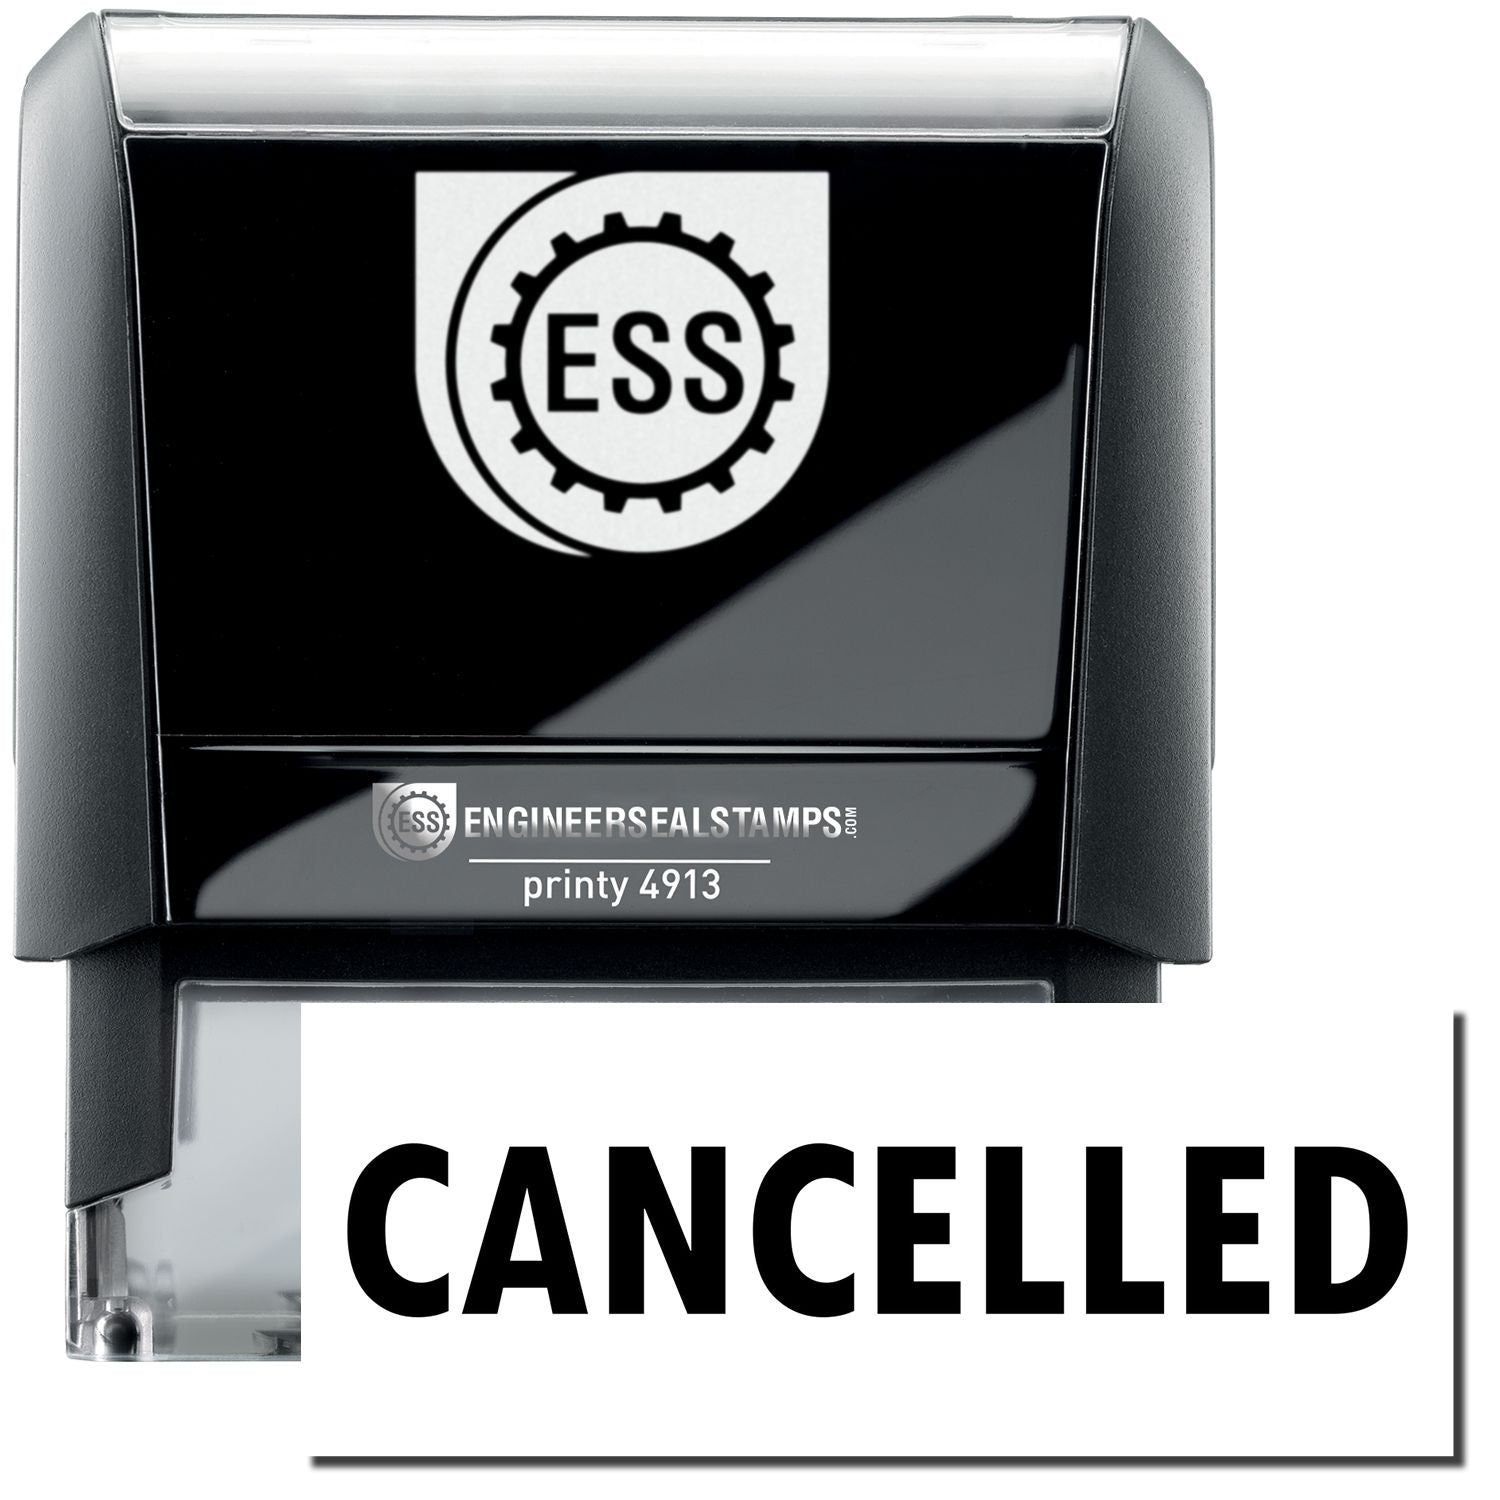 A large self-inking stamp with a stamped image showing how the text "CANCELLED" in a large bold font is displayed by it.